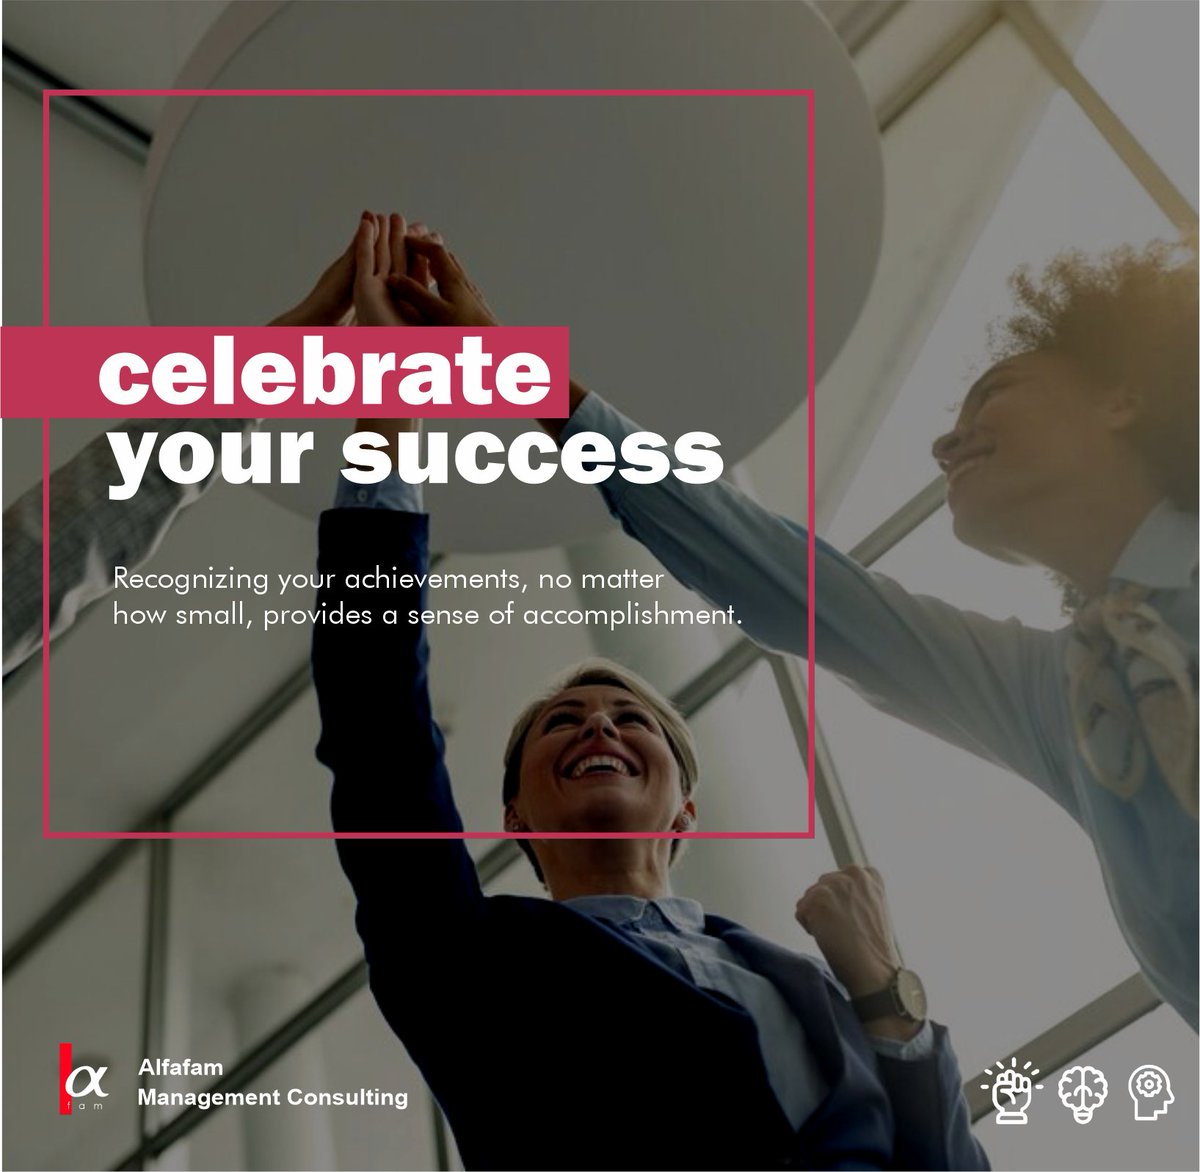 Celebrate your successes, and view setbacks as opportunities for learning and growth. Adjust your strategies based on what you learn from your challenges.  
#SuccessCelebration #LearningFromFailure